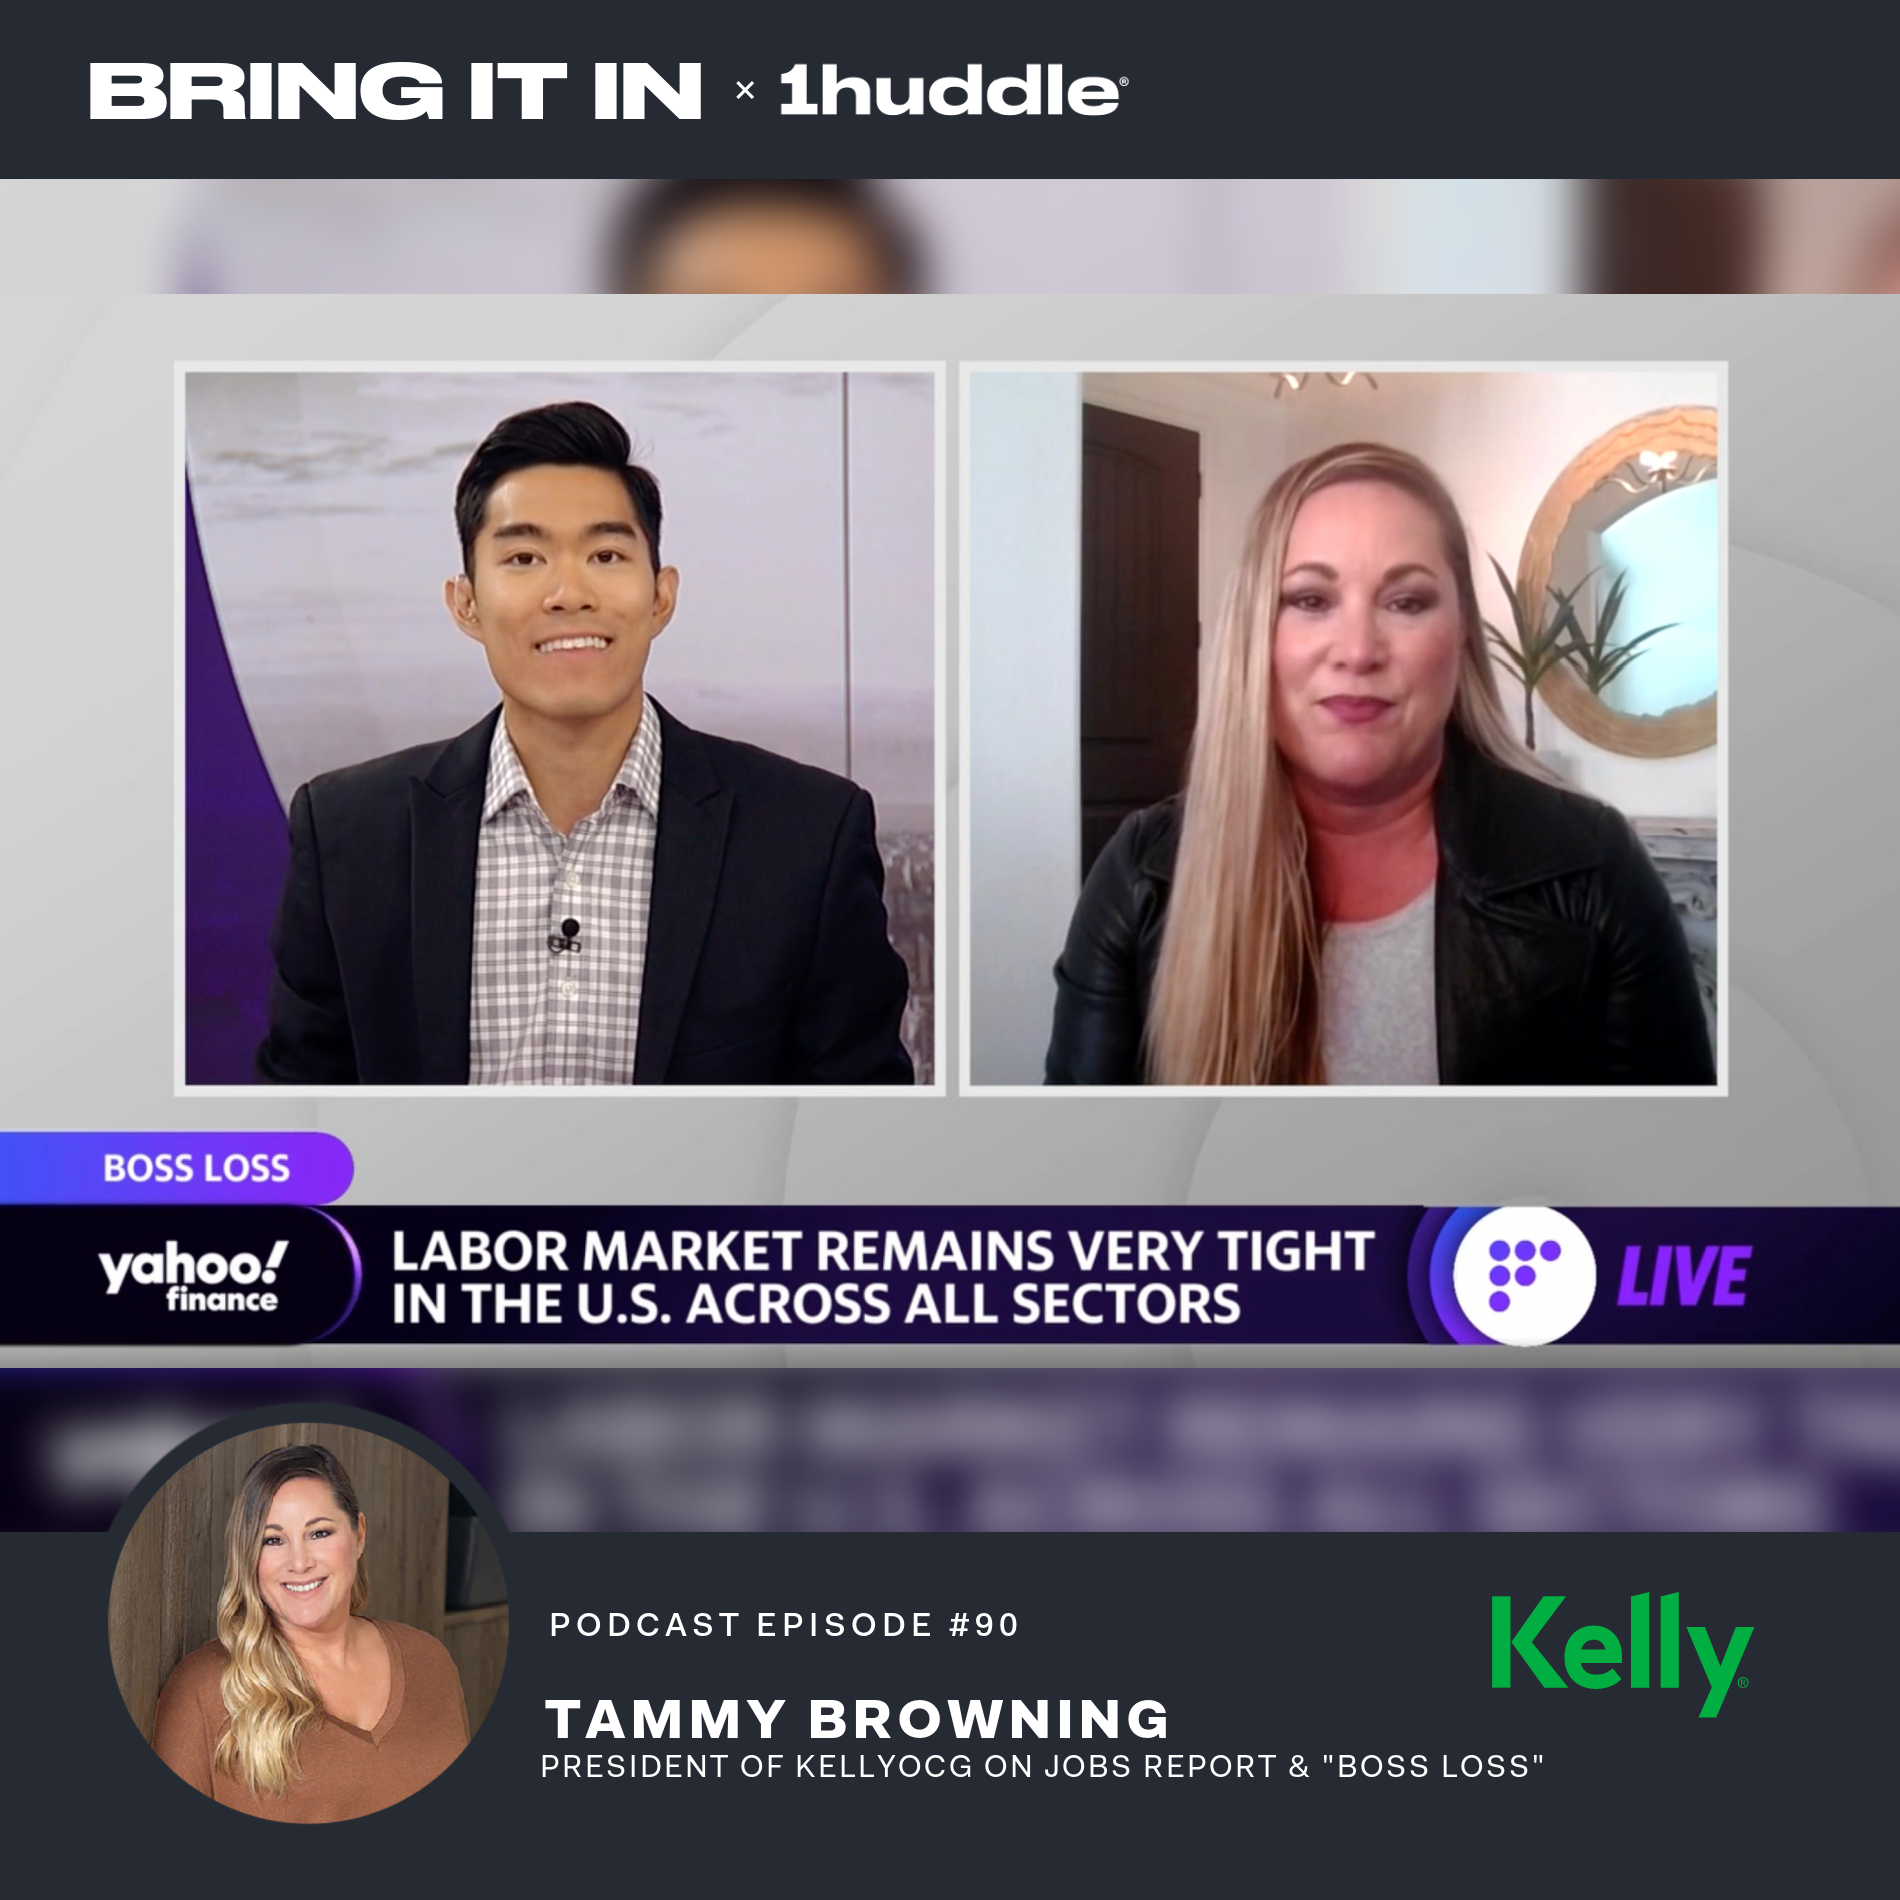 Tammy Browning, President of KellyOCG on Jobs Report and “Boss Loss”